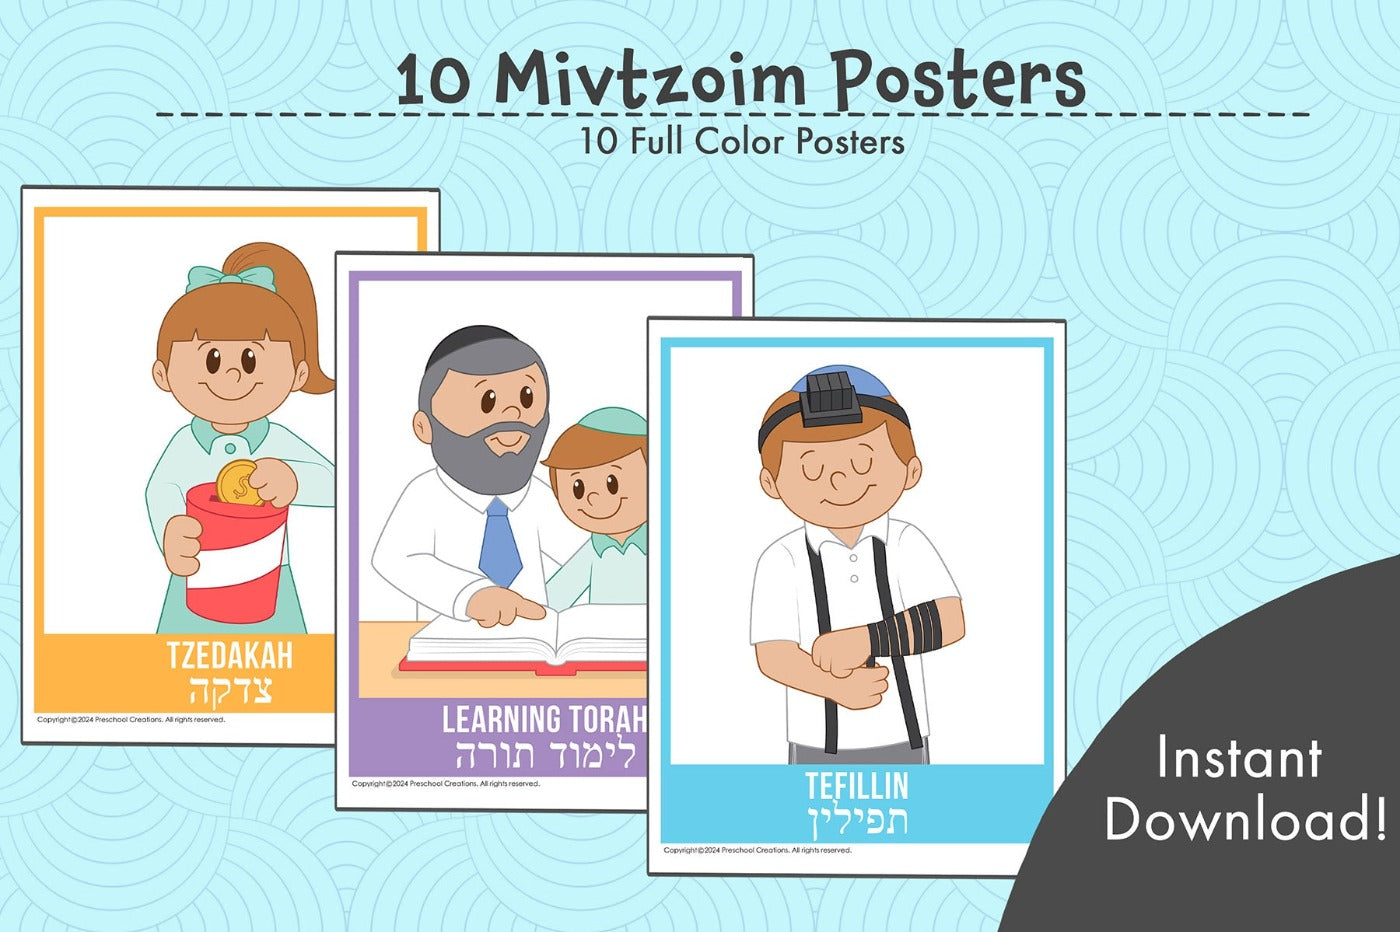 10 Beautiful full color posters depicting the 10 Mivtzoim / 10 Mitzvah campaigns initiated by the Lubavitcher Rebbe.  Bring the spirit of the Rebbe's 10 mitzvah campaigns into your classroom and home with our bright and vibrant posters. These eye-catching posters serve as a daily reminder to fulfill these important mitzvot and spread awareness of these mitzvos to bring Moshiach now! 